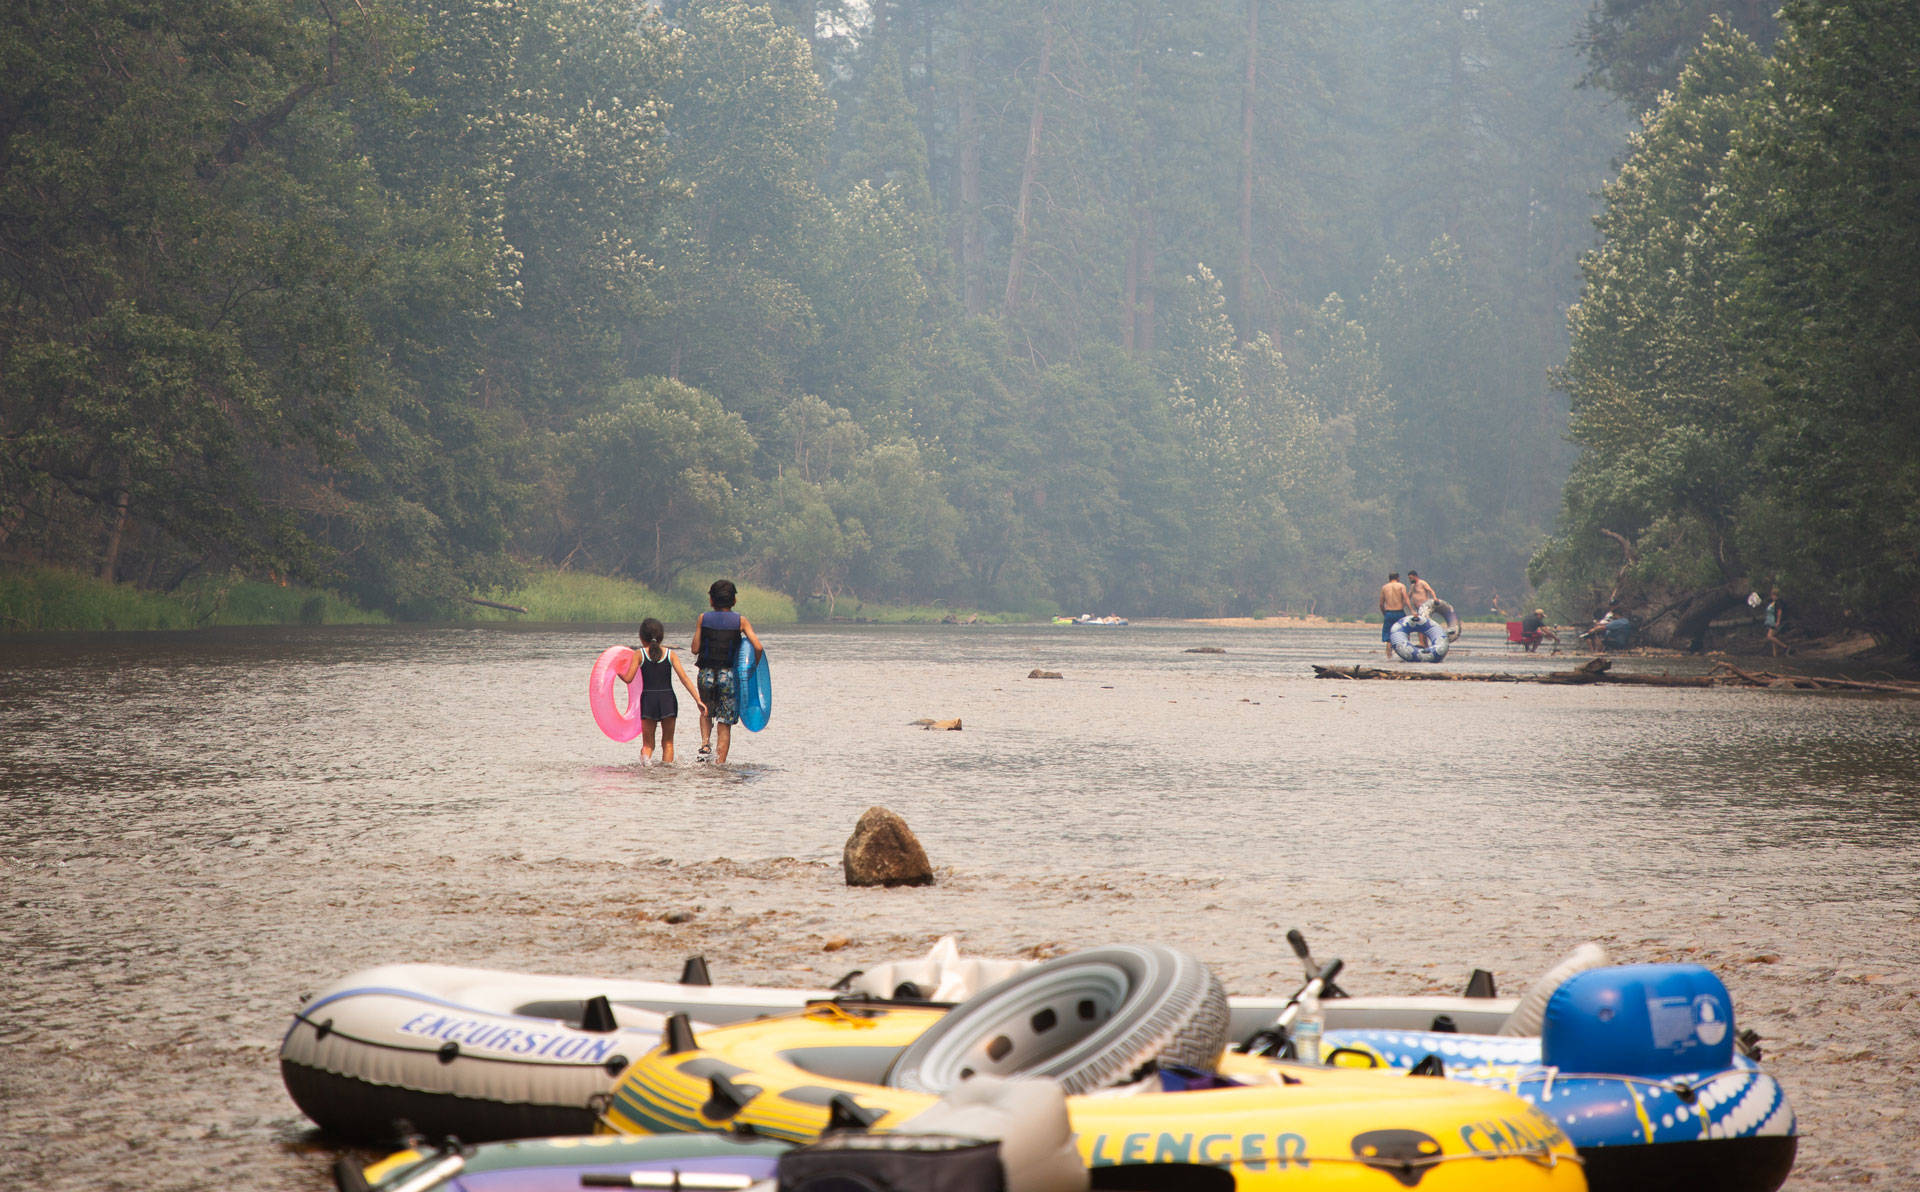 Yosemite National Park-goers raft in the Merced River just before the Yosemite Valley closed in July due to the Ferguson Fire. Samantha Shanahan/KQED